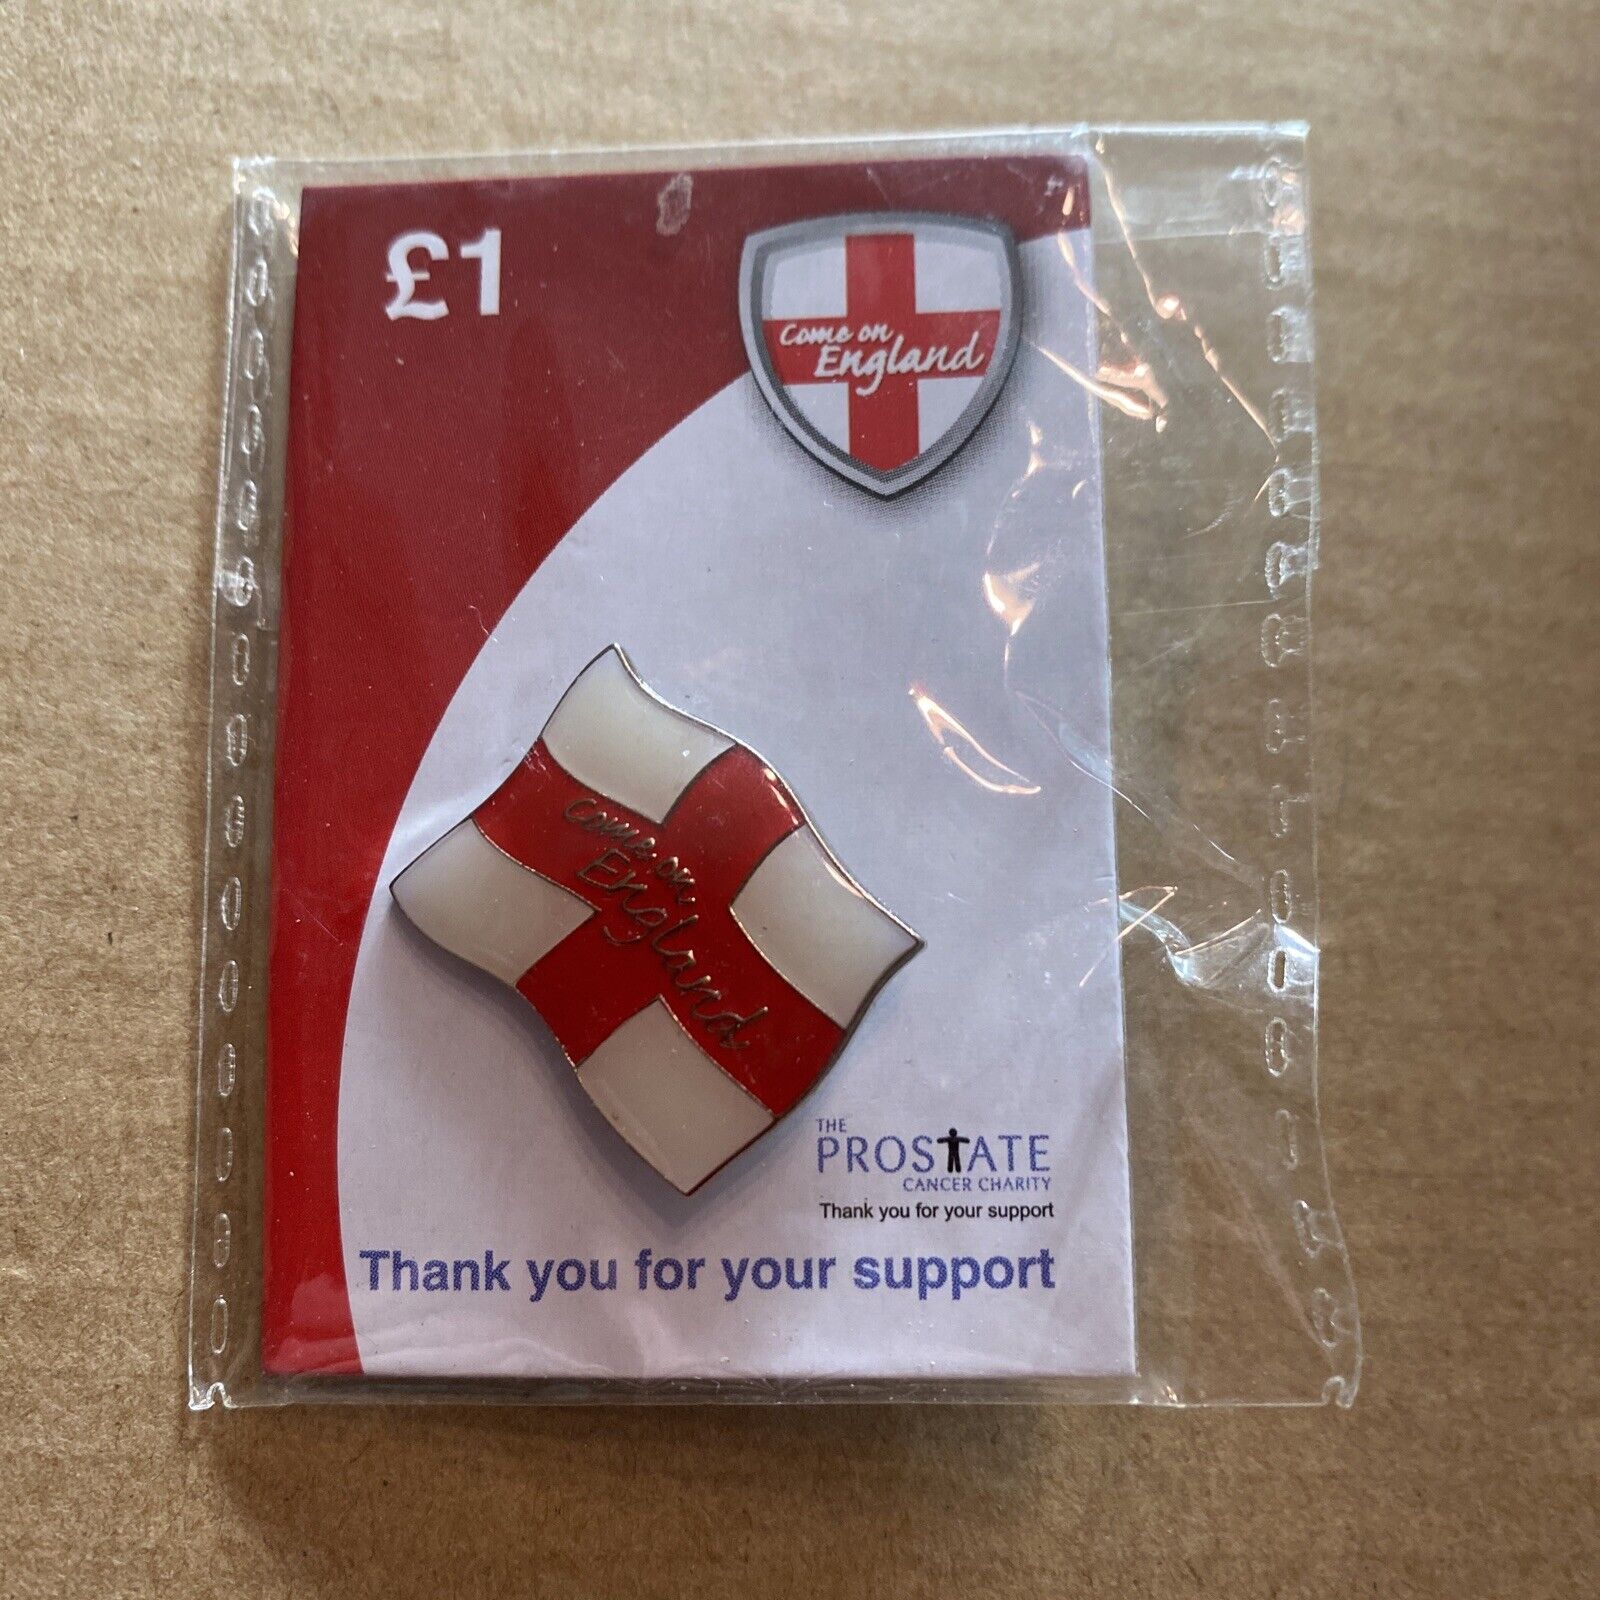 Come On England Prostate Cancer Charity Pin Badge